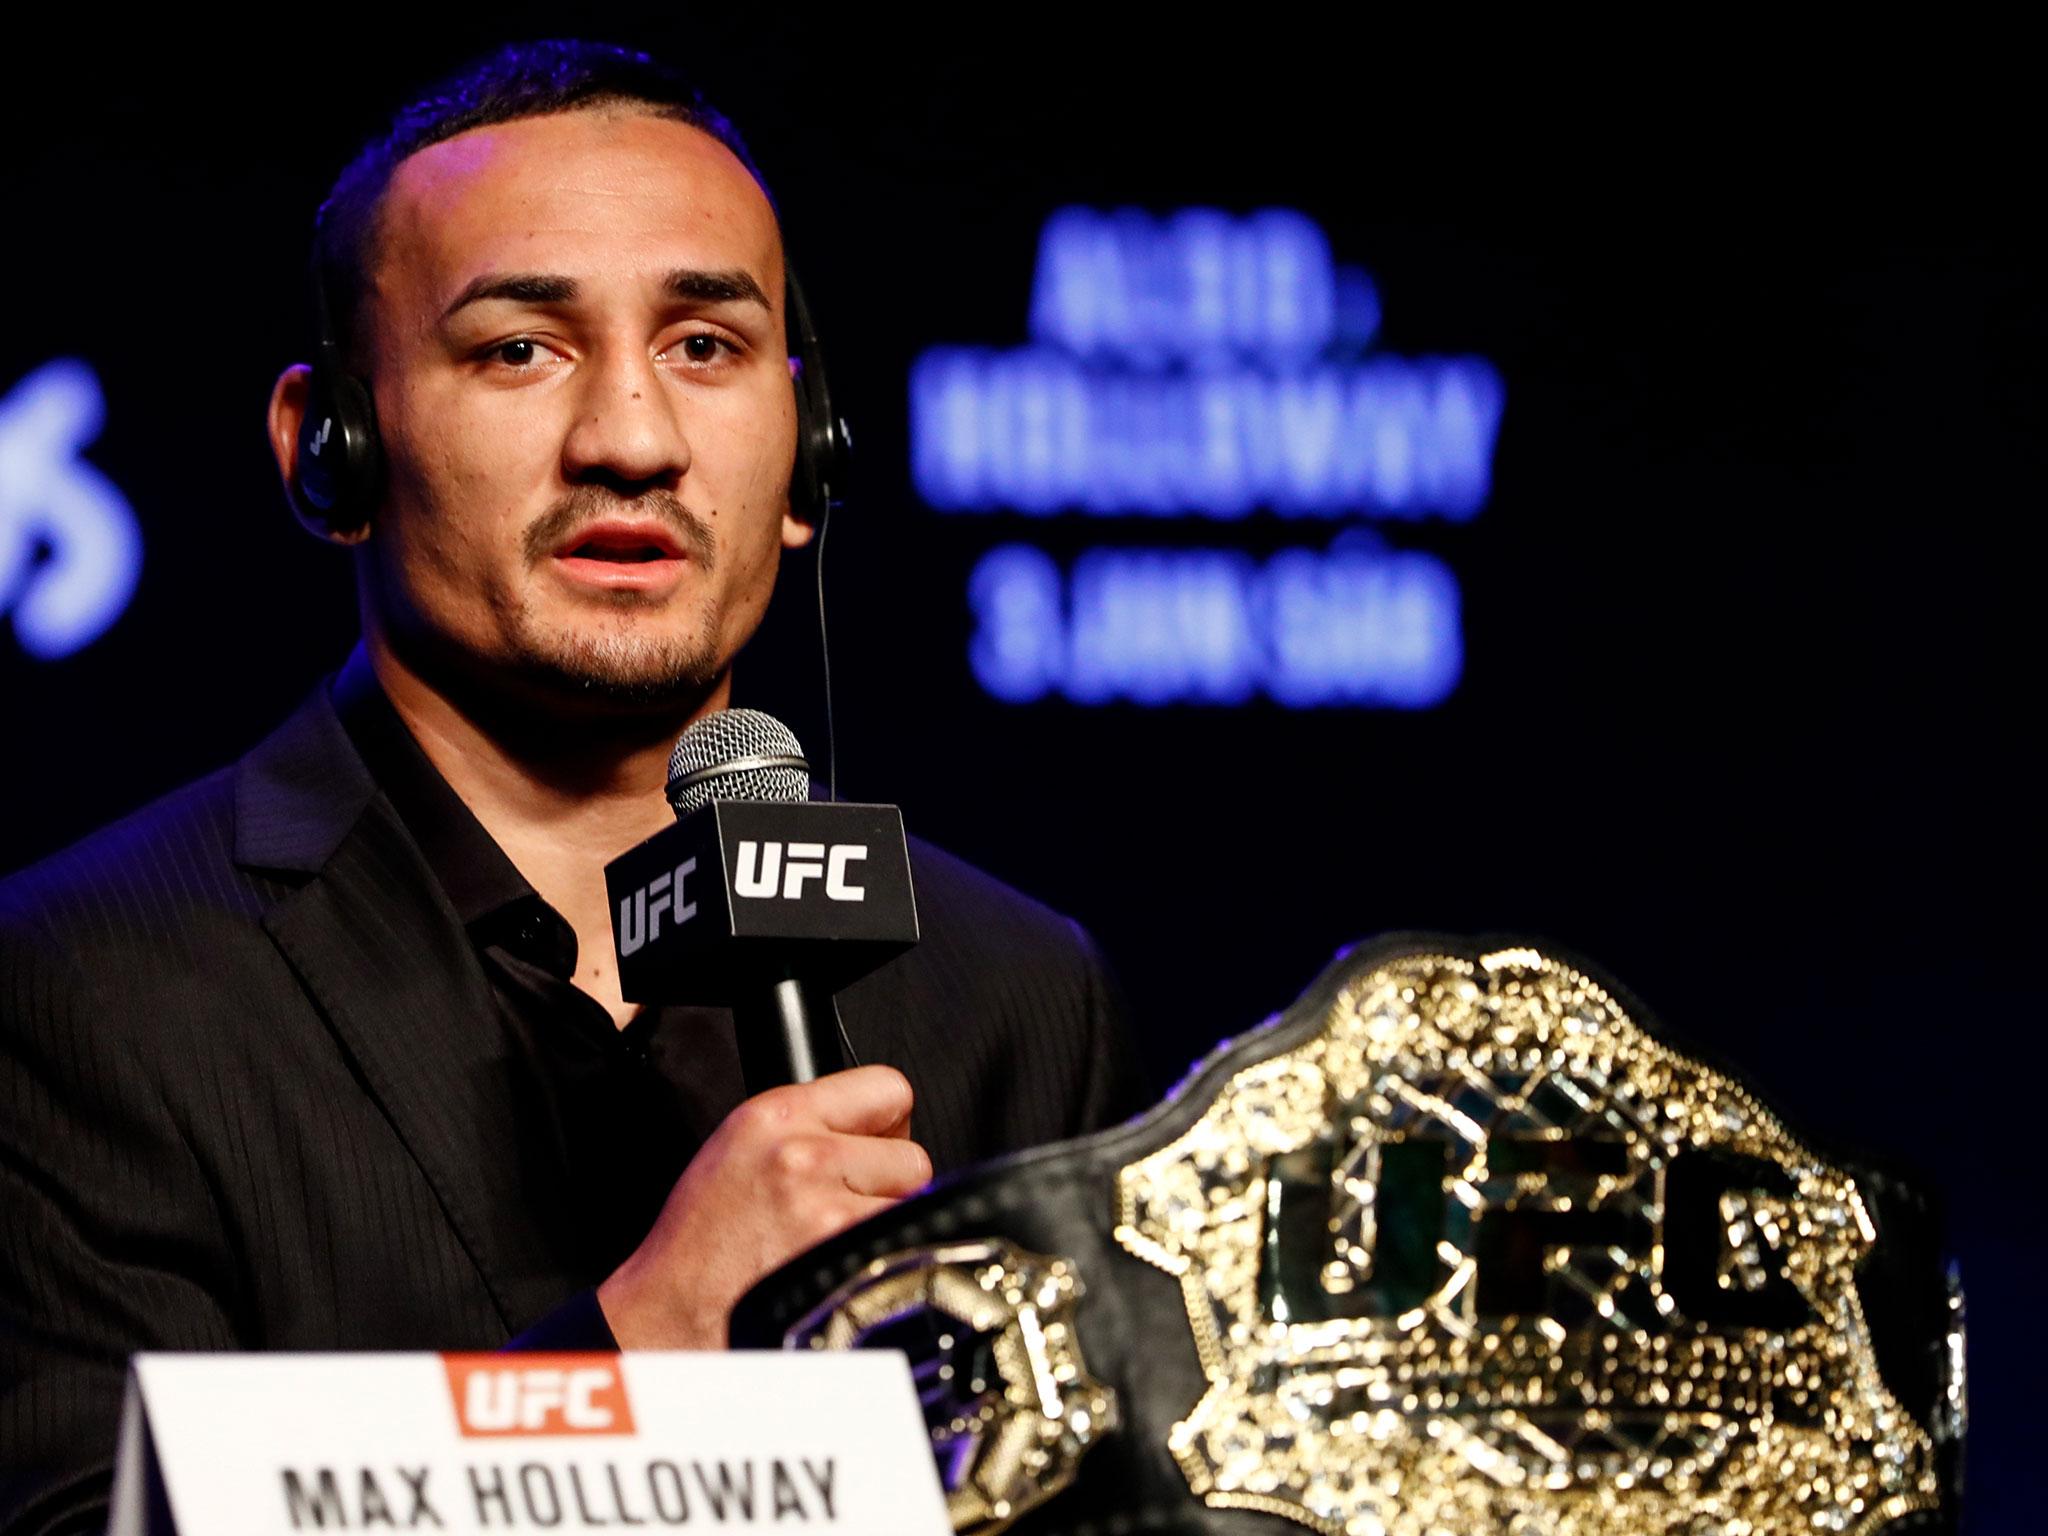 Holloway is the former UFC Featherweight Champion